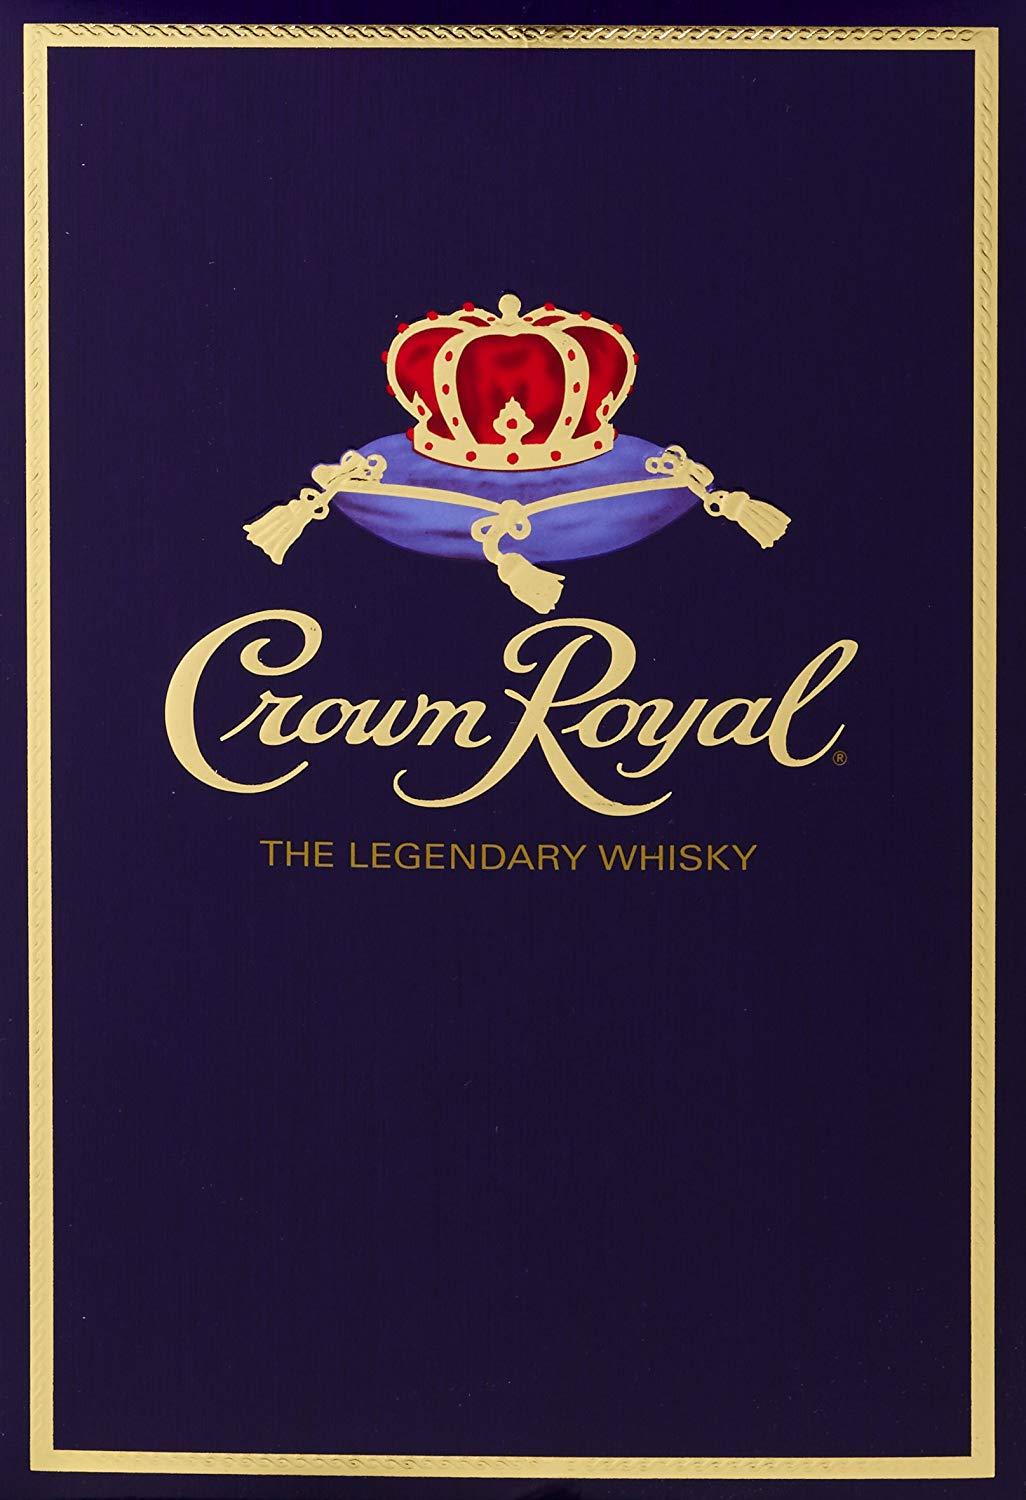 Crown Royal Logo - Crown Royal Canadian Whisky: Amazon.com: Grocery & Gourmet Food